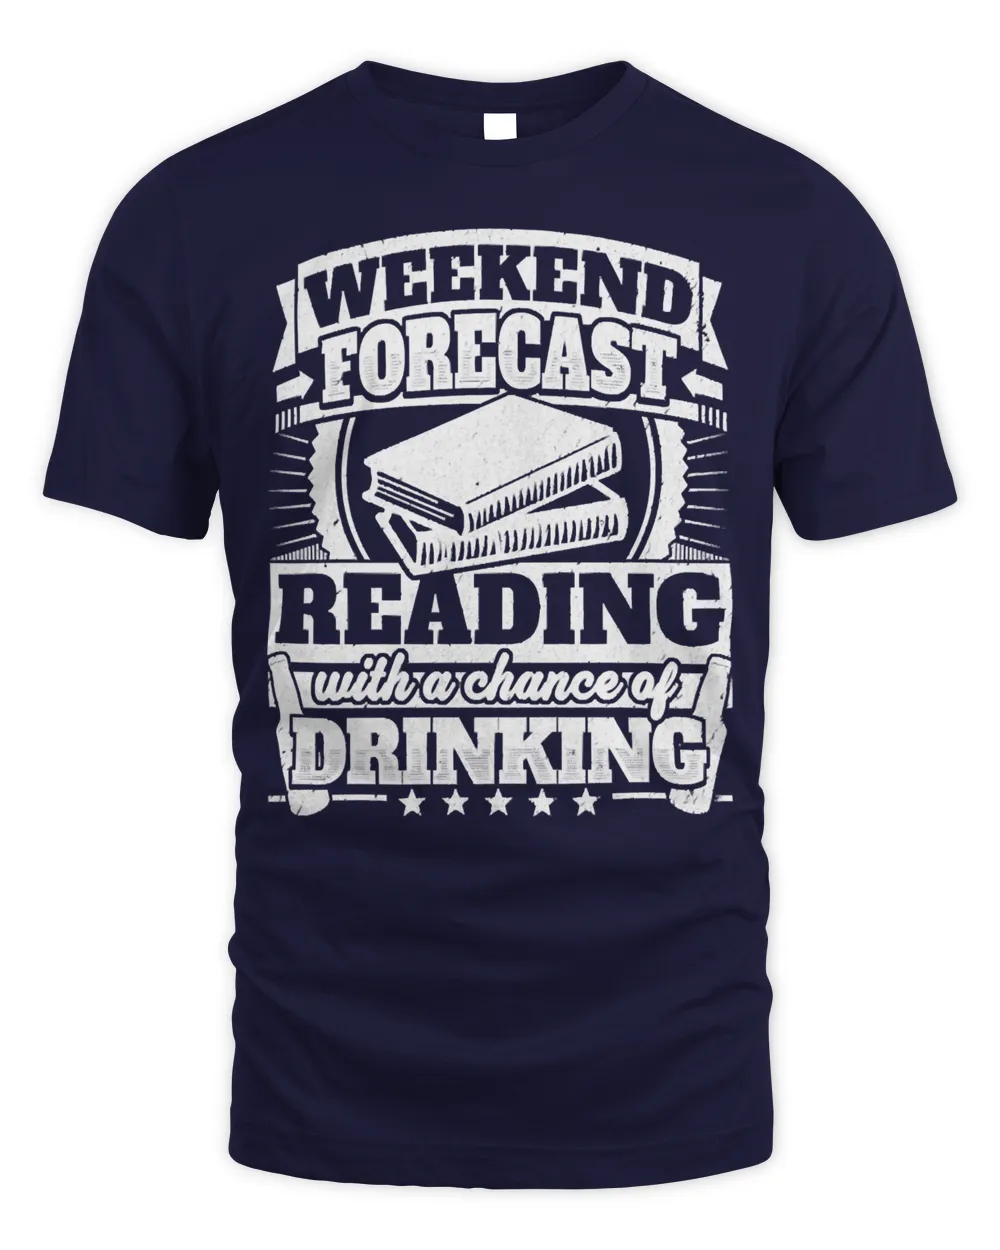 Book Reader Weekend Forecast Reading Drinking Tee 446 Reading Library